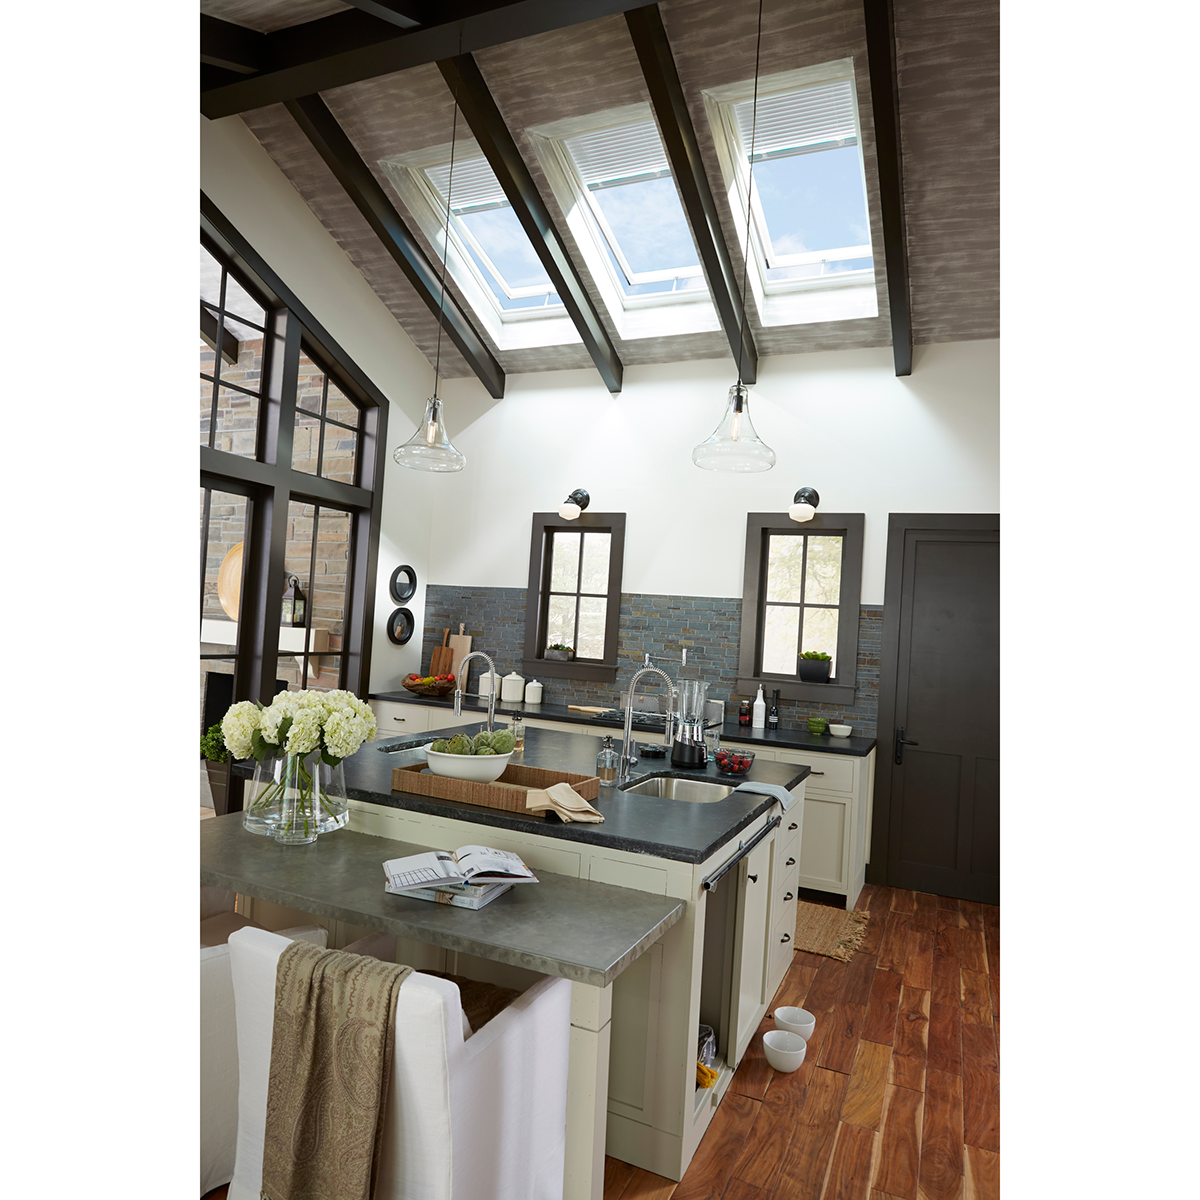 Manual Curb-Mount Skylight with Laminated Low-E3 Glass - 34-1/2 in. x 34-1/2 in. - VCM 3434